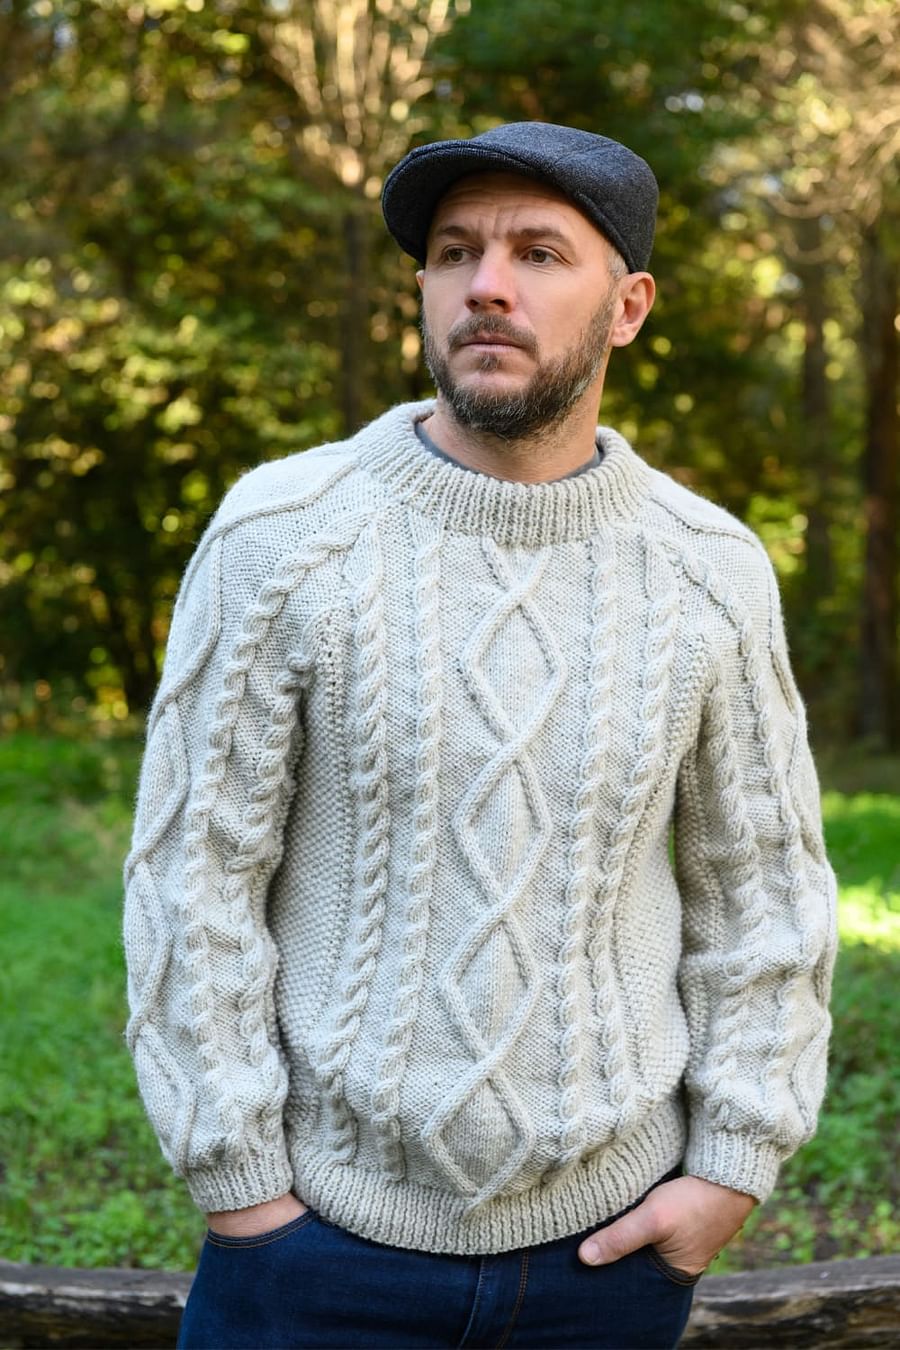 Unique hand-knitted sweater showcasing intricate pattern